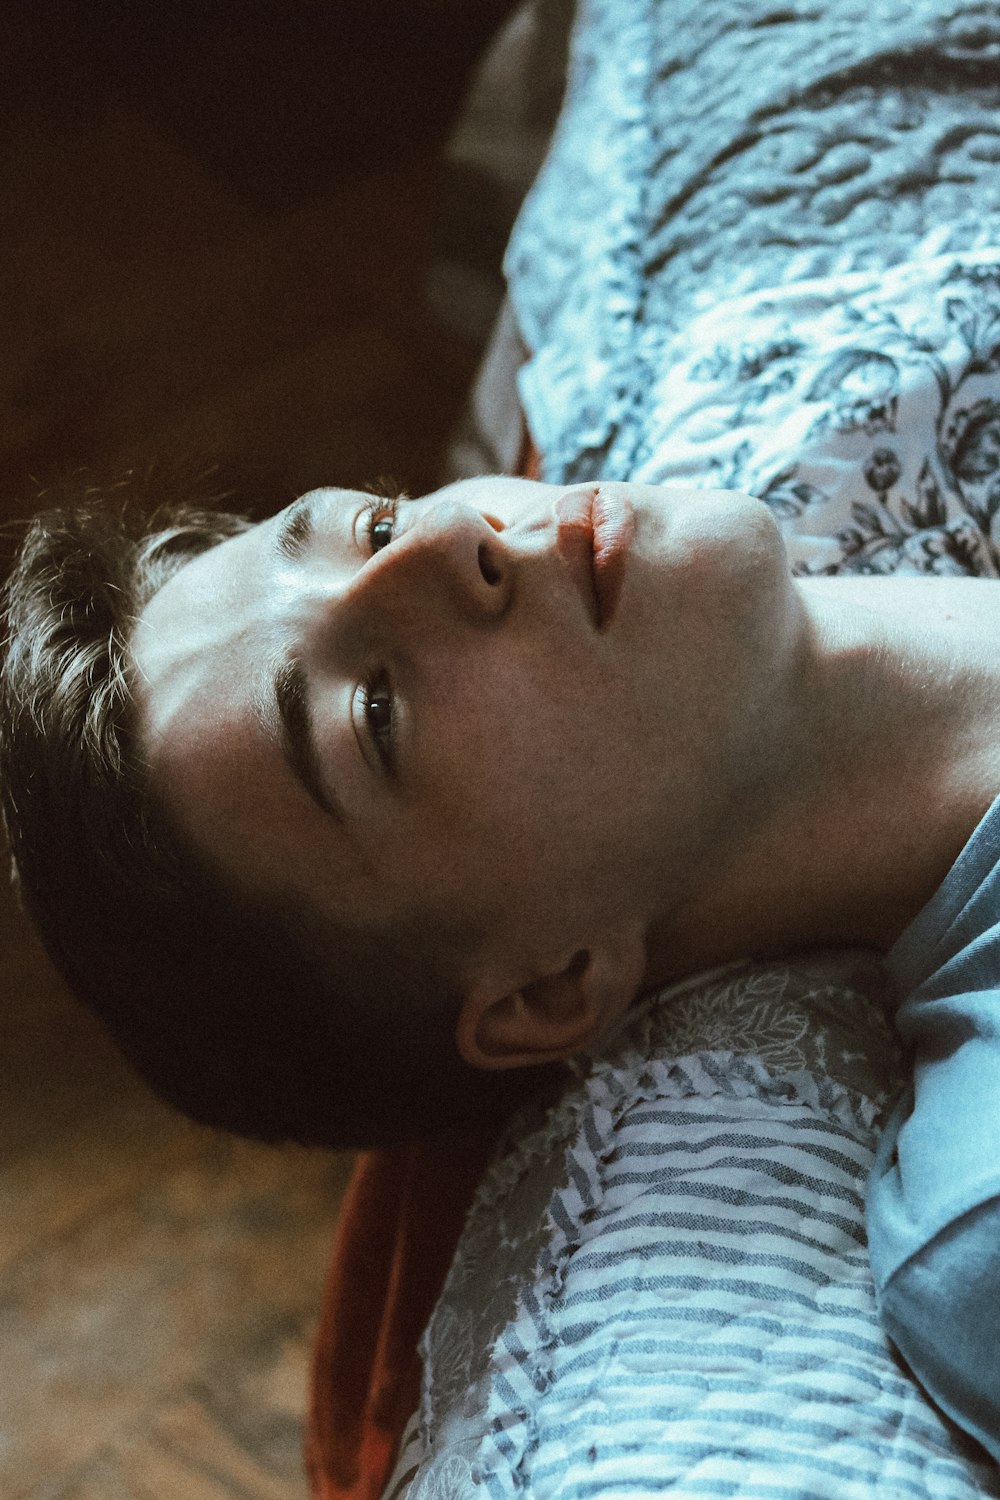 person wearing gray shirt lying on white and gray floral textile